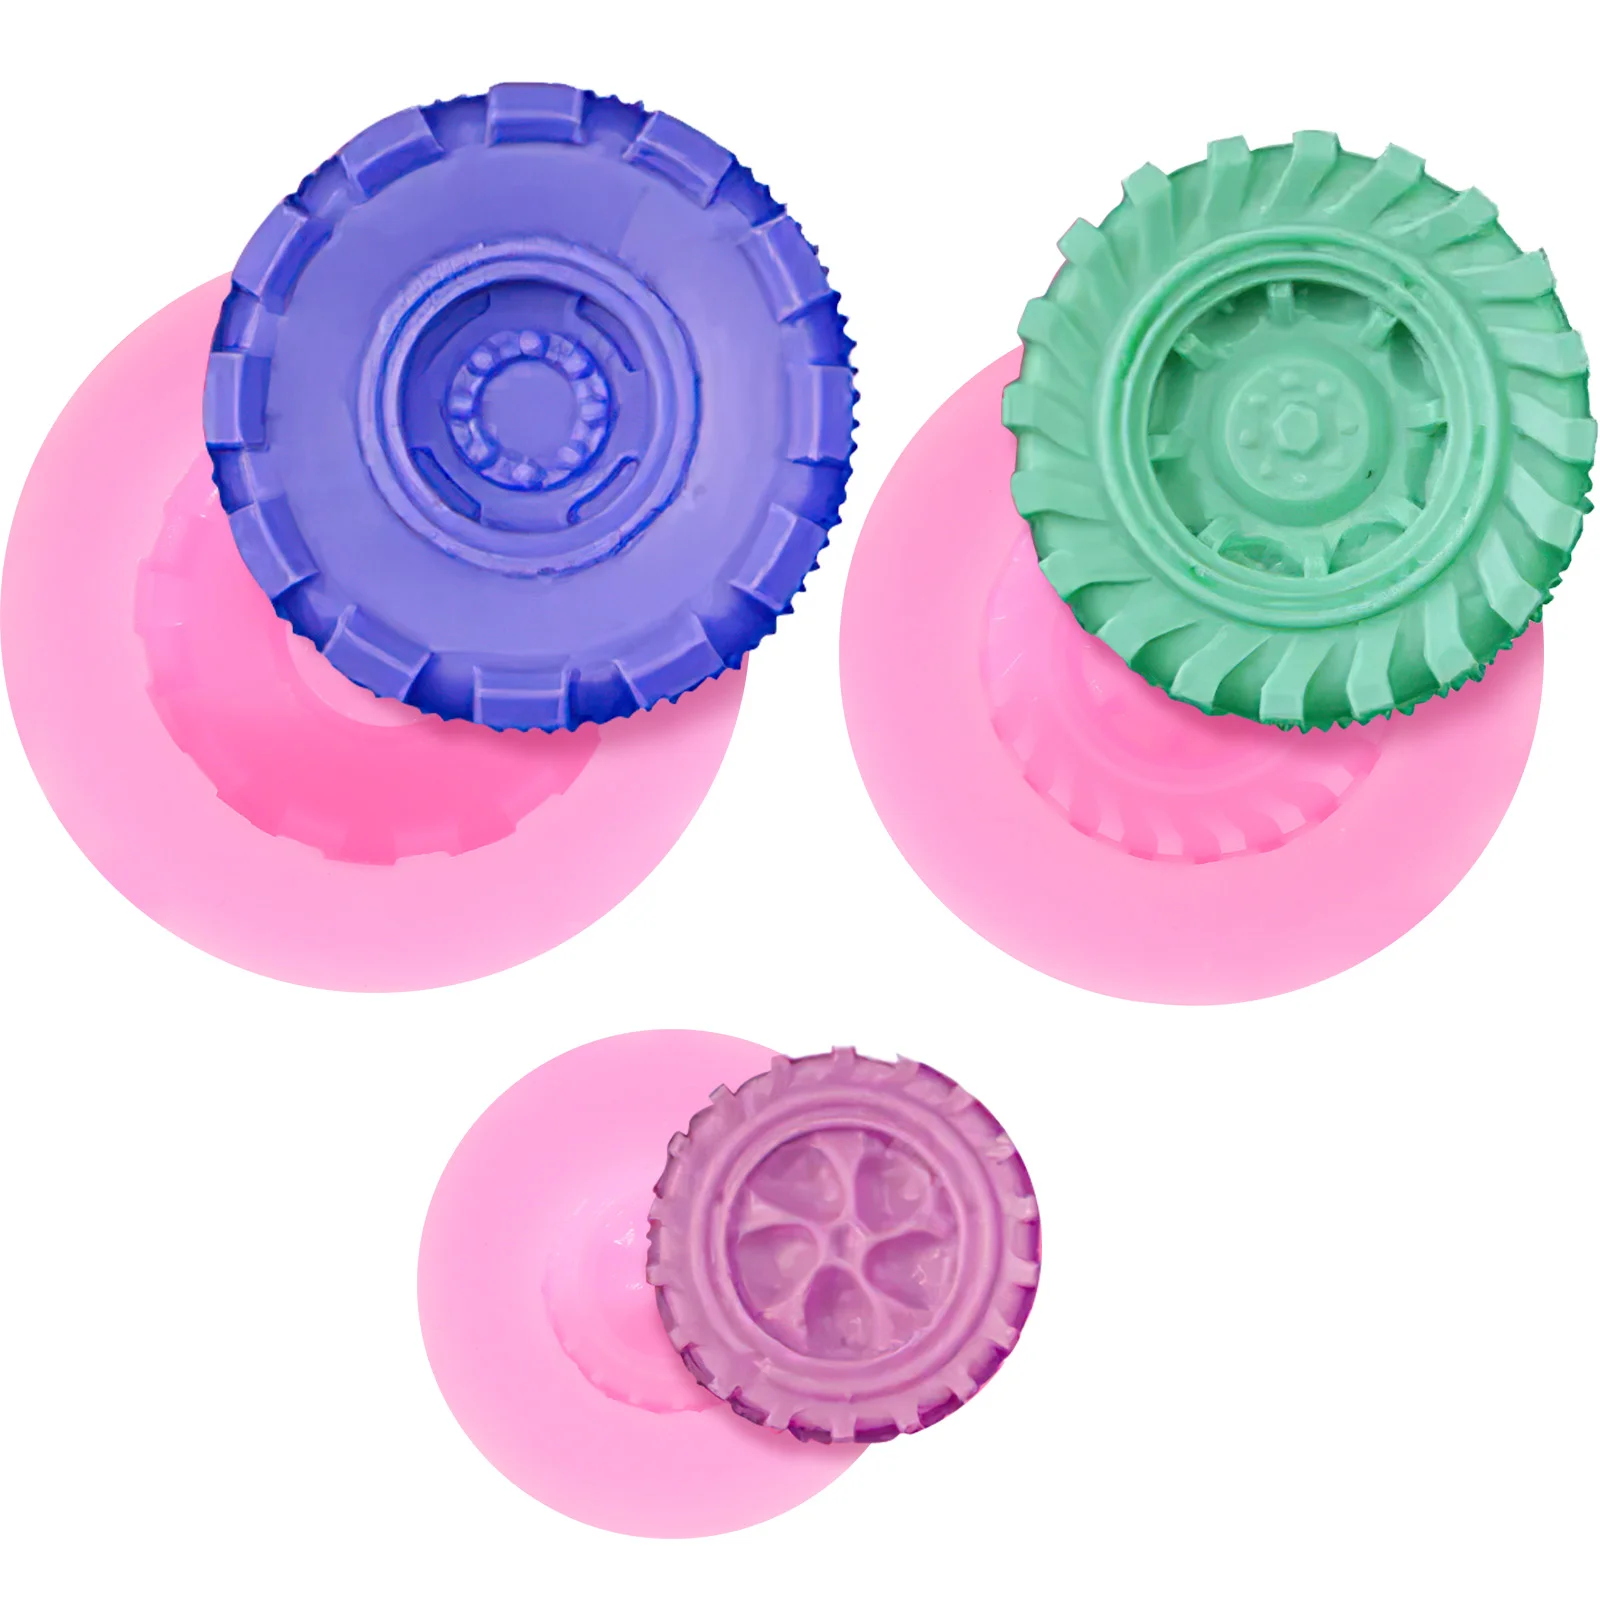 

3 Pcs Modeling Wheel Silicone Mold Moulds Candles 3D Cake Silica Gel Making Molds Pizza